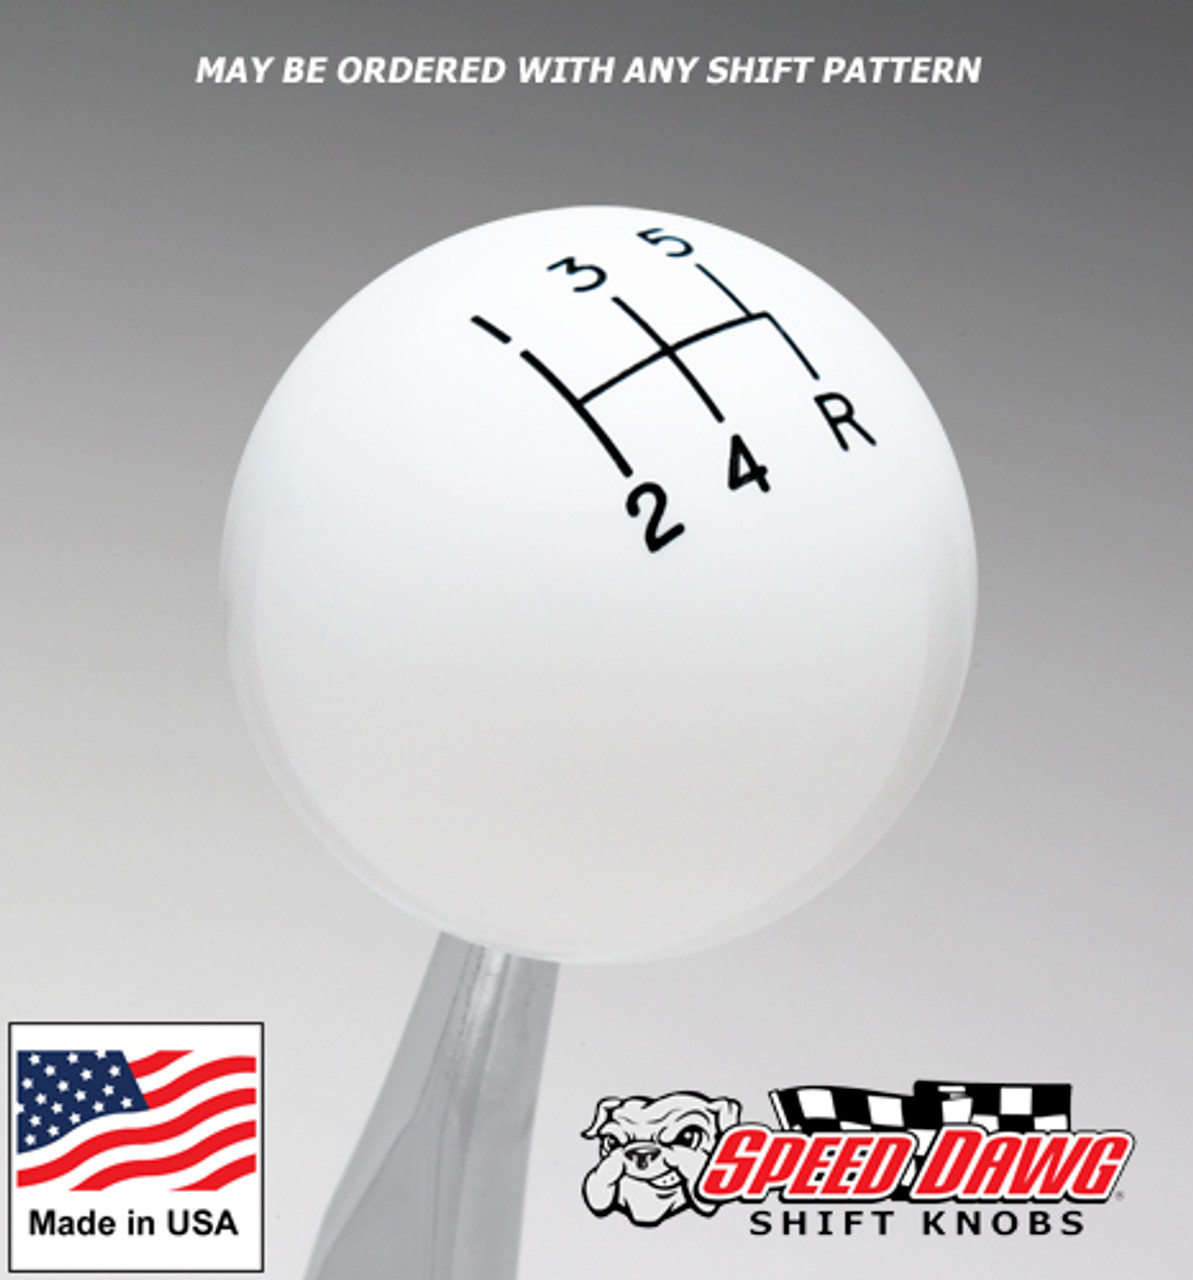 White 5 Speed Shift Knob with Engraved Shift Pattern